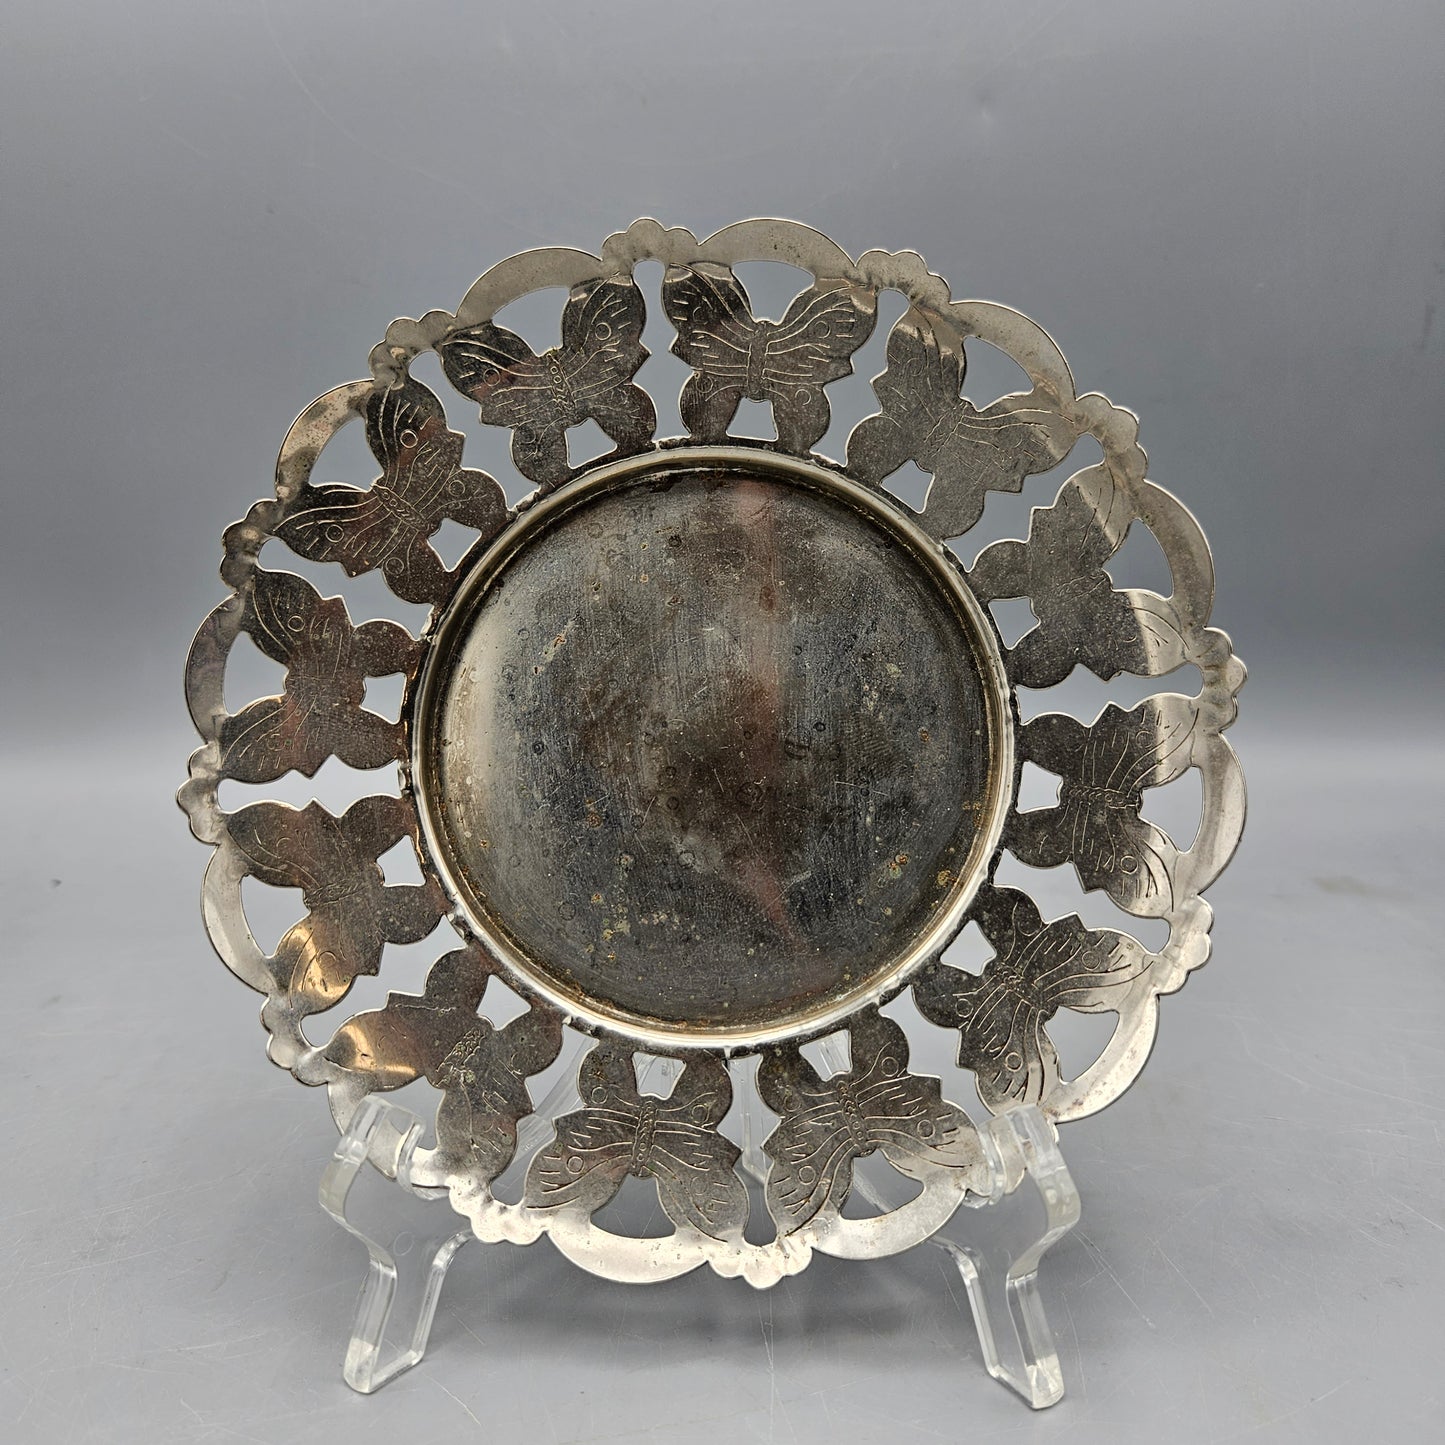 Vintage Silver Plate Dish with Butterflies